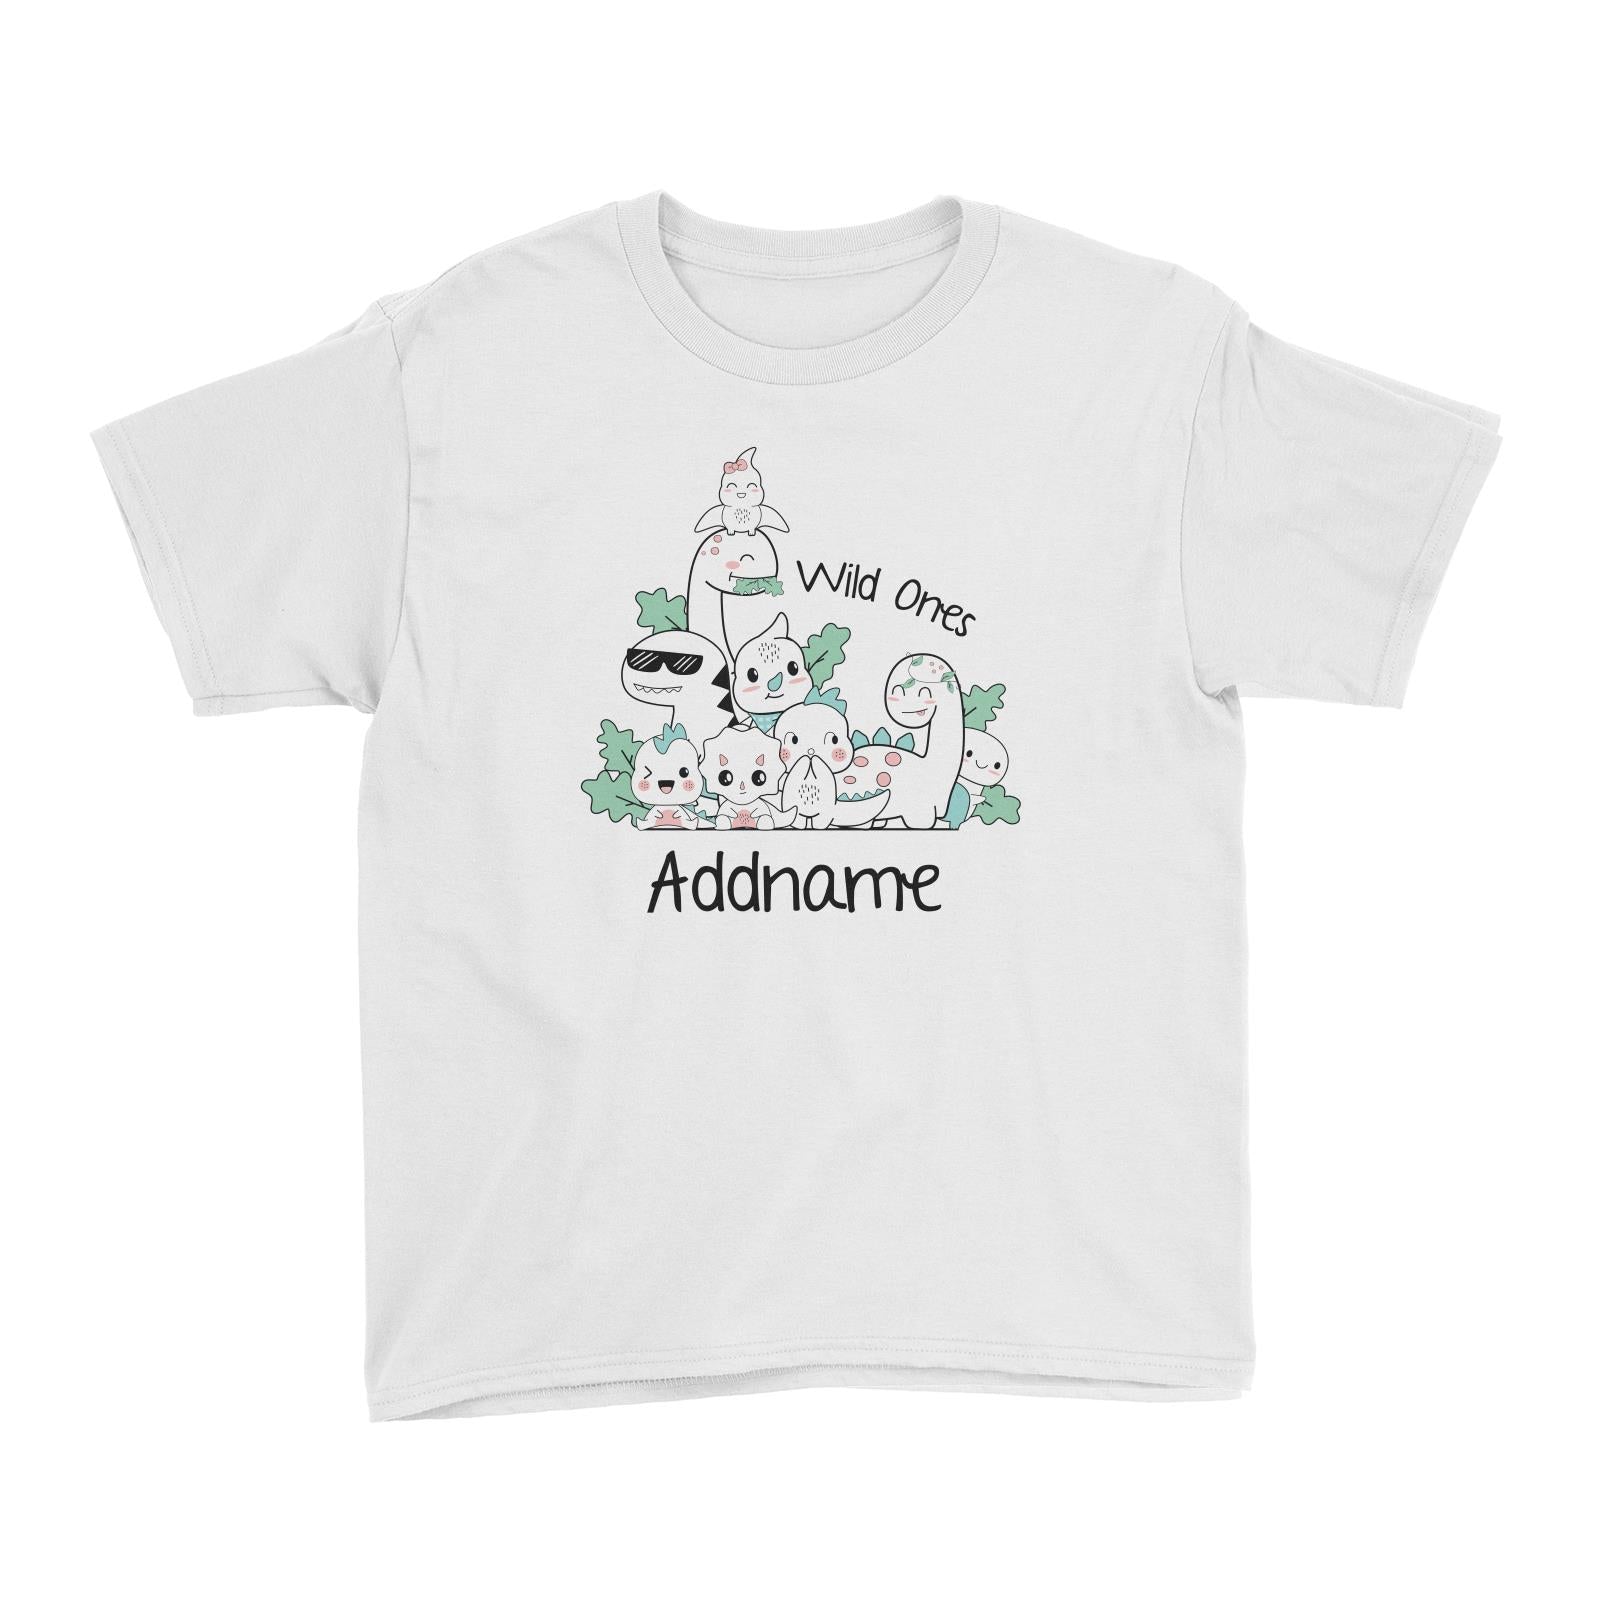 Cute Animals And Friends Series Cute Little Dinosaur Wild Ones Addname Kid's T-Shirt